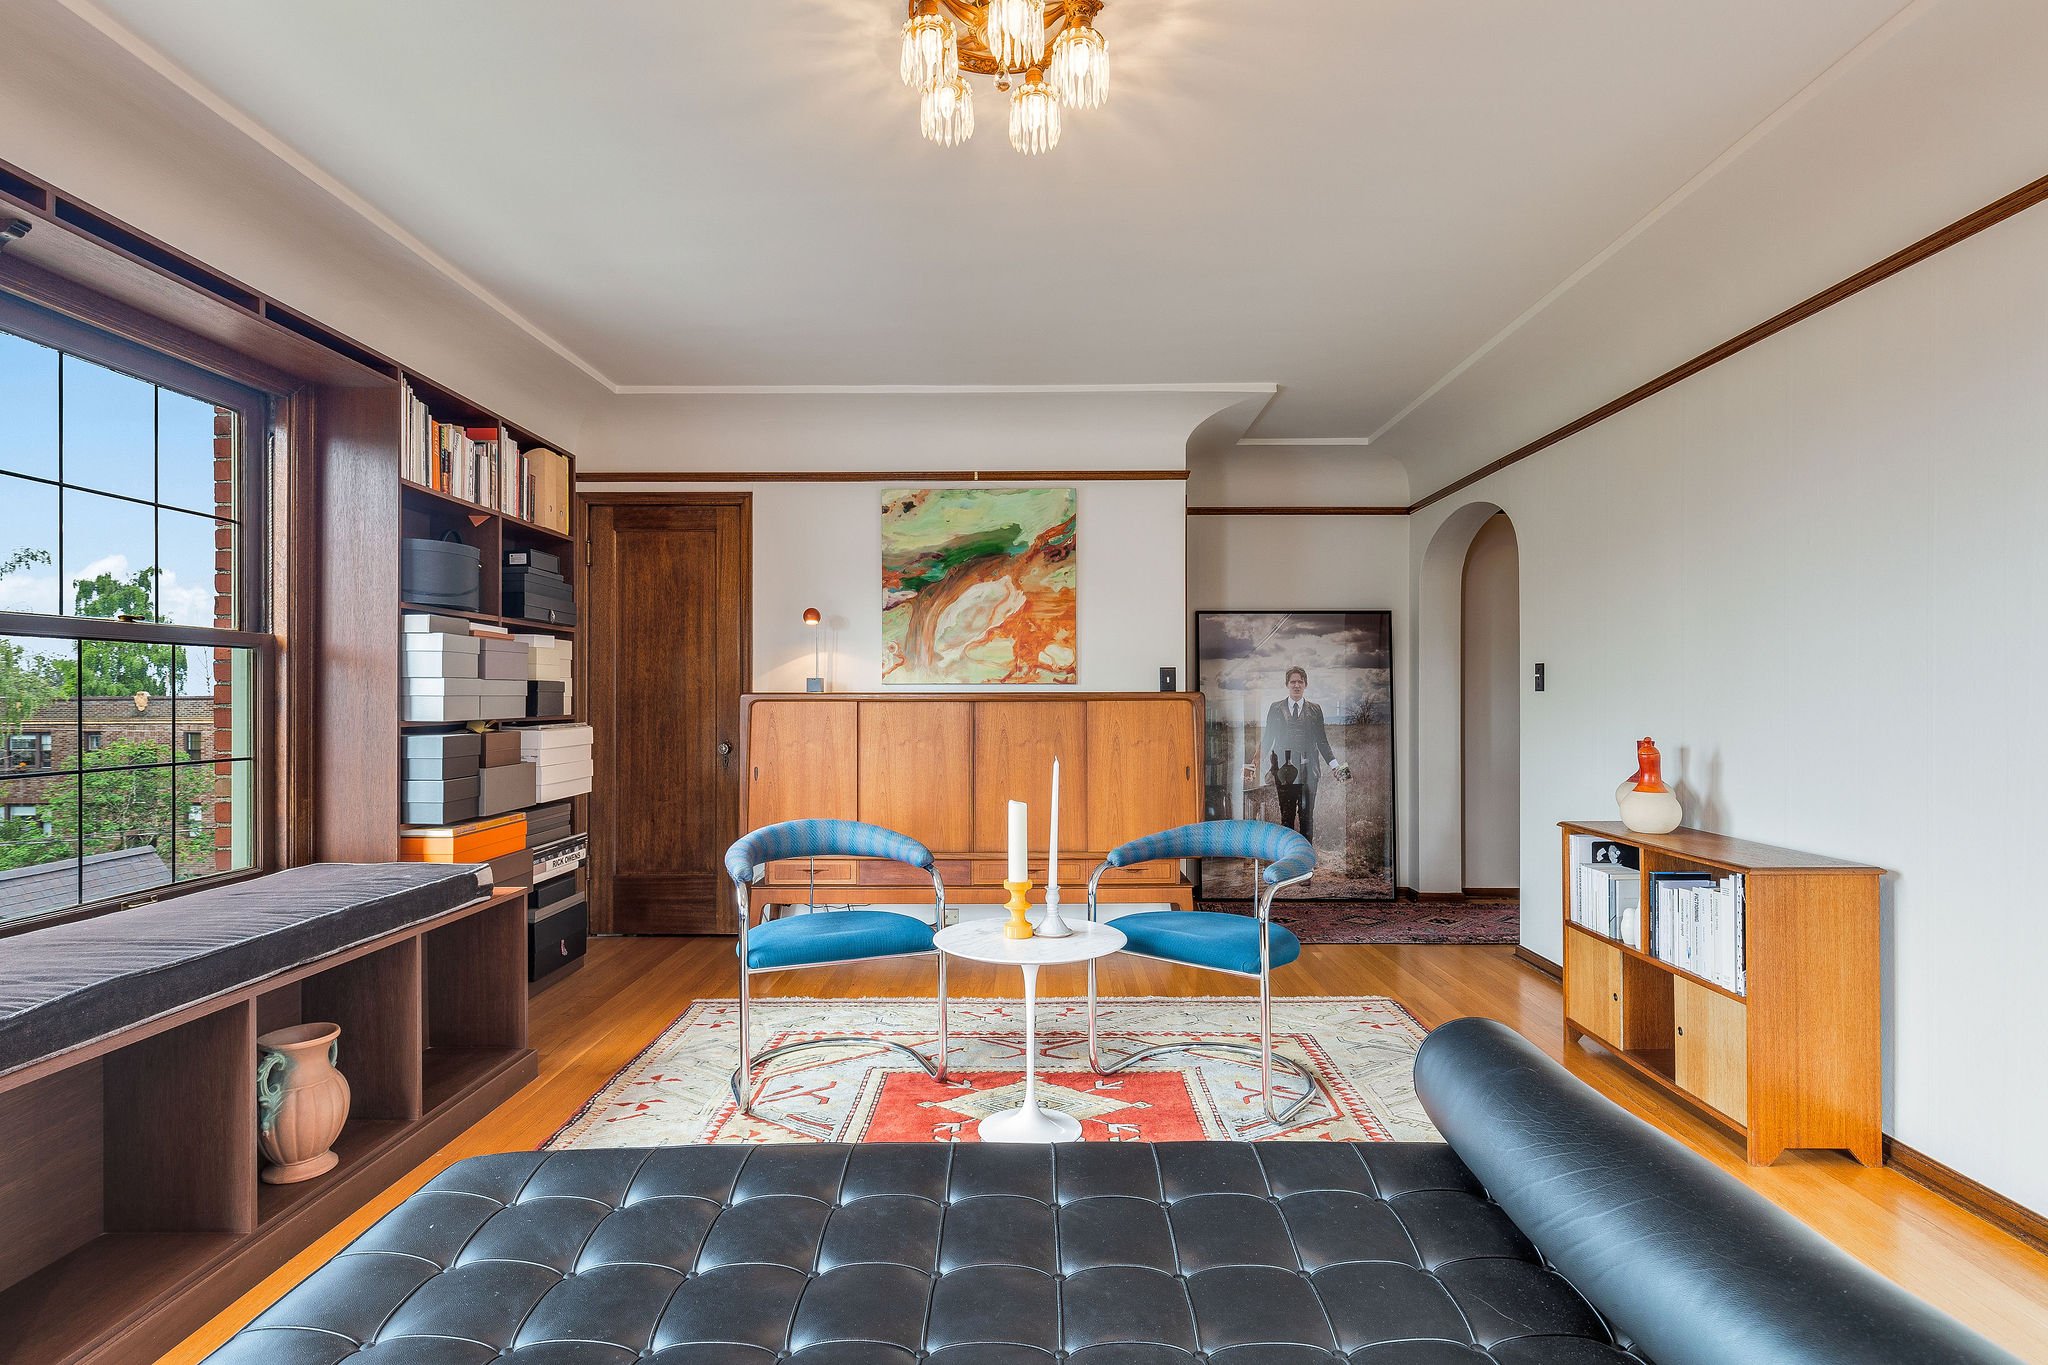 All furniture, including the Mies van der Rohe Barcelona couch are negotiable for sale.